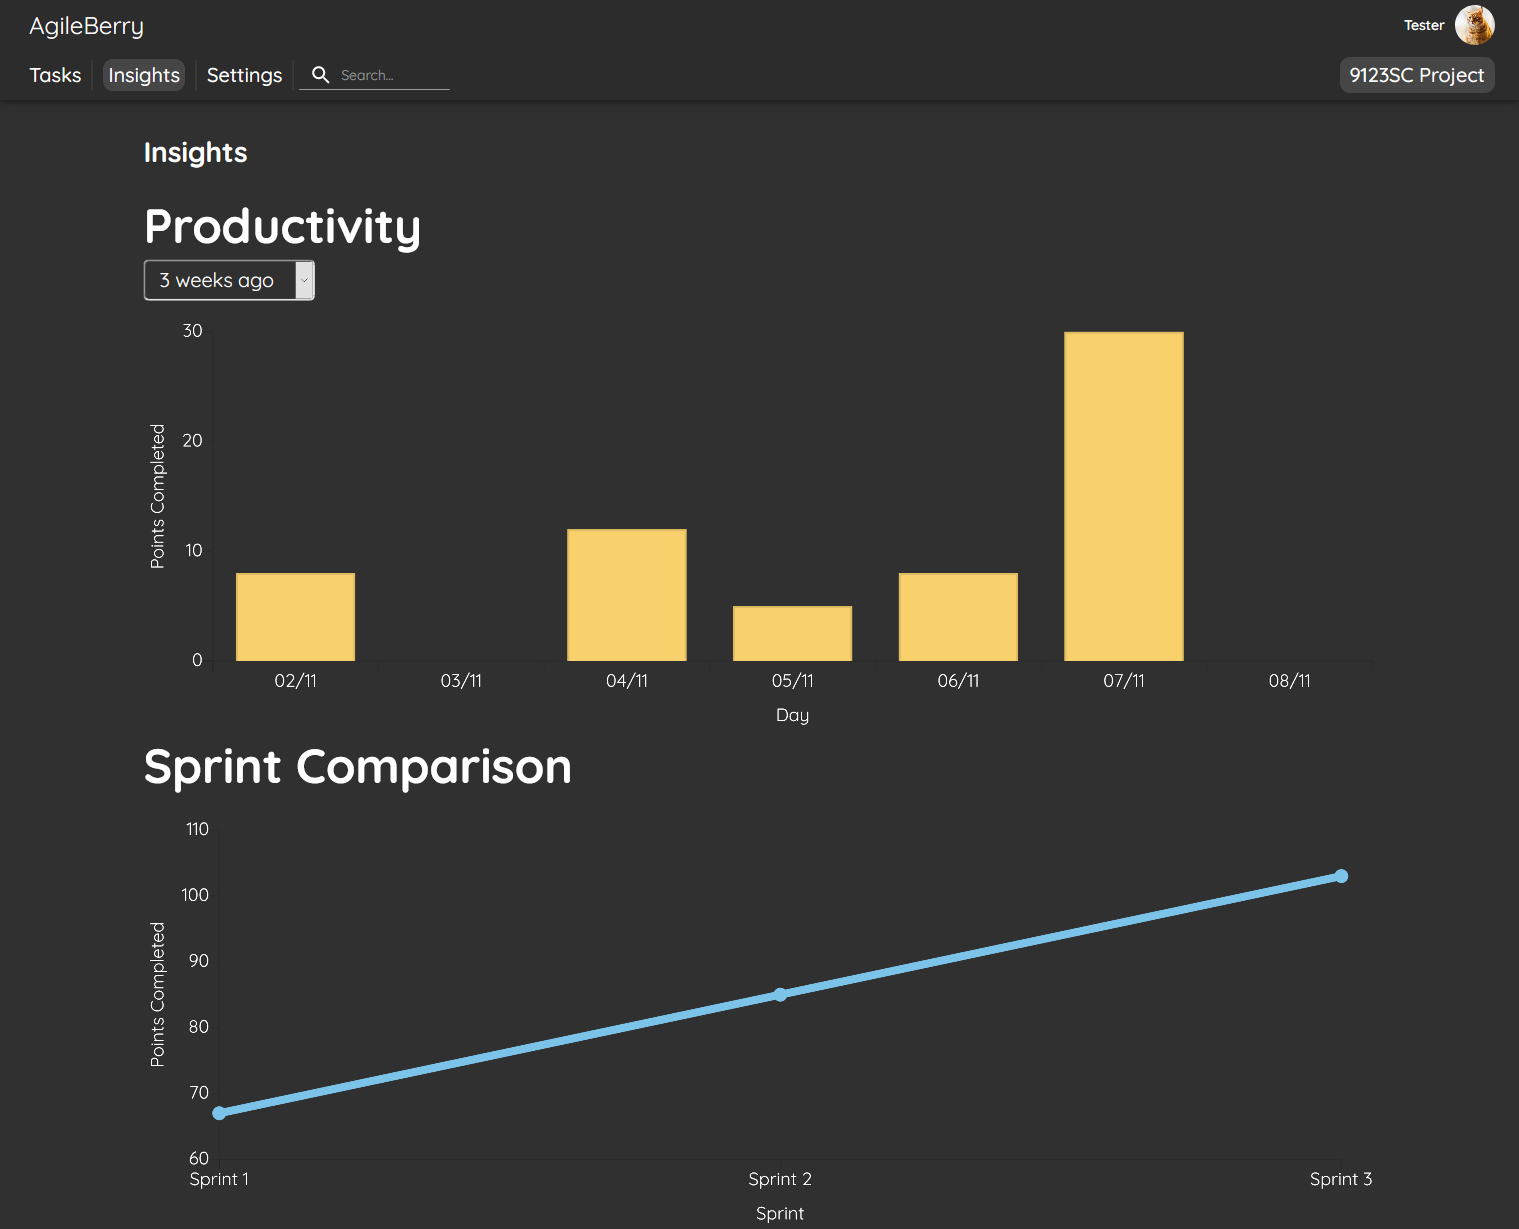 The insights page detailing sprint insights including sprint productivity and points comparison